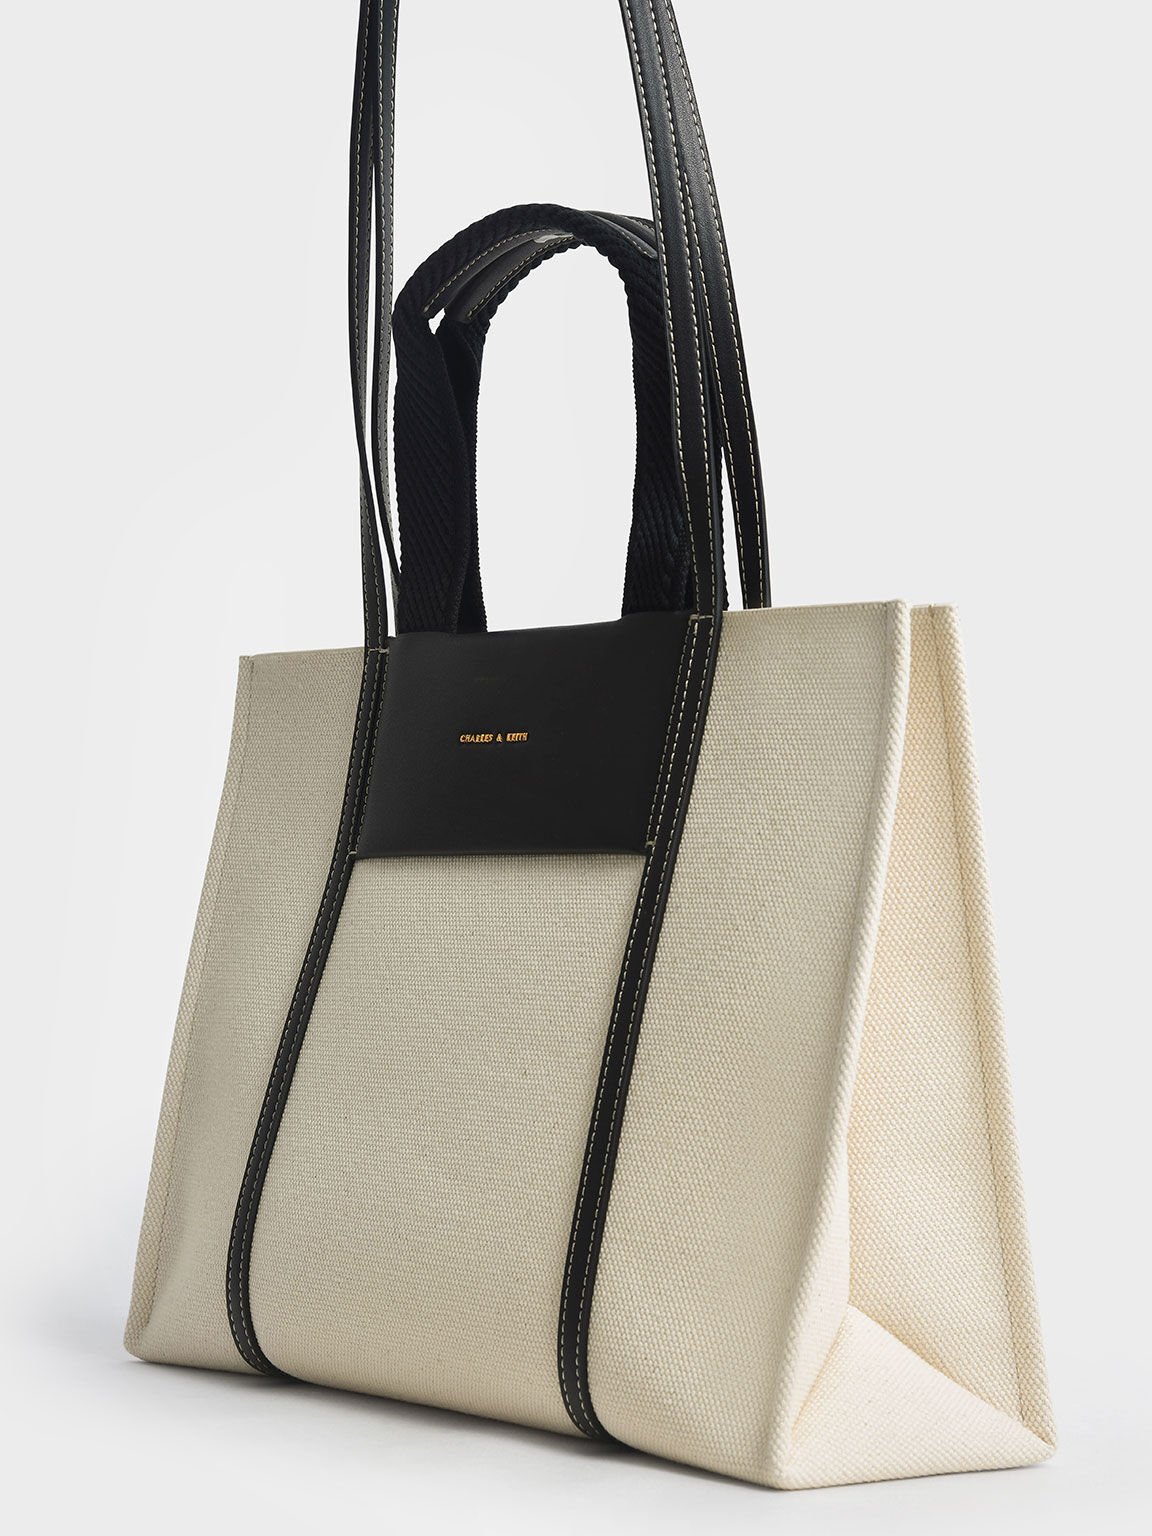 Charles & Keith Women's Panelled Tote Bag